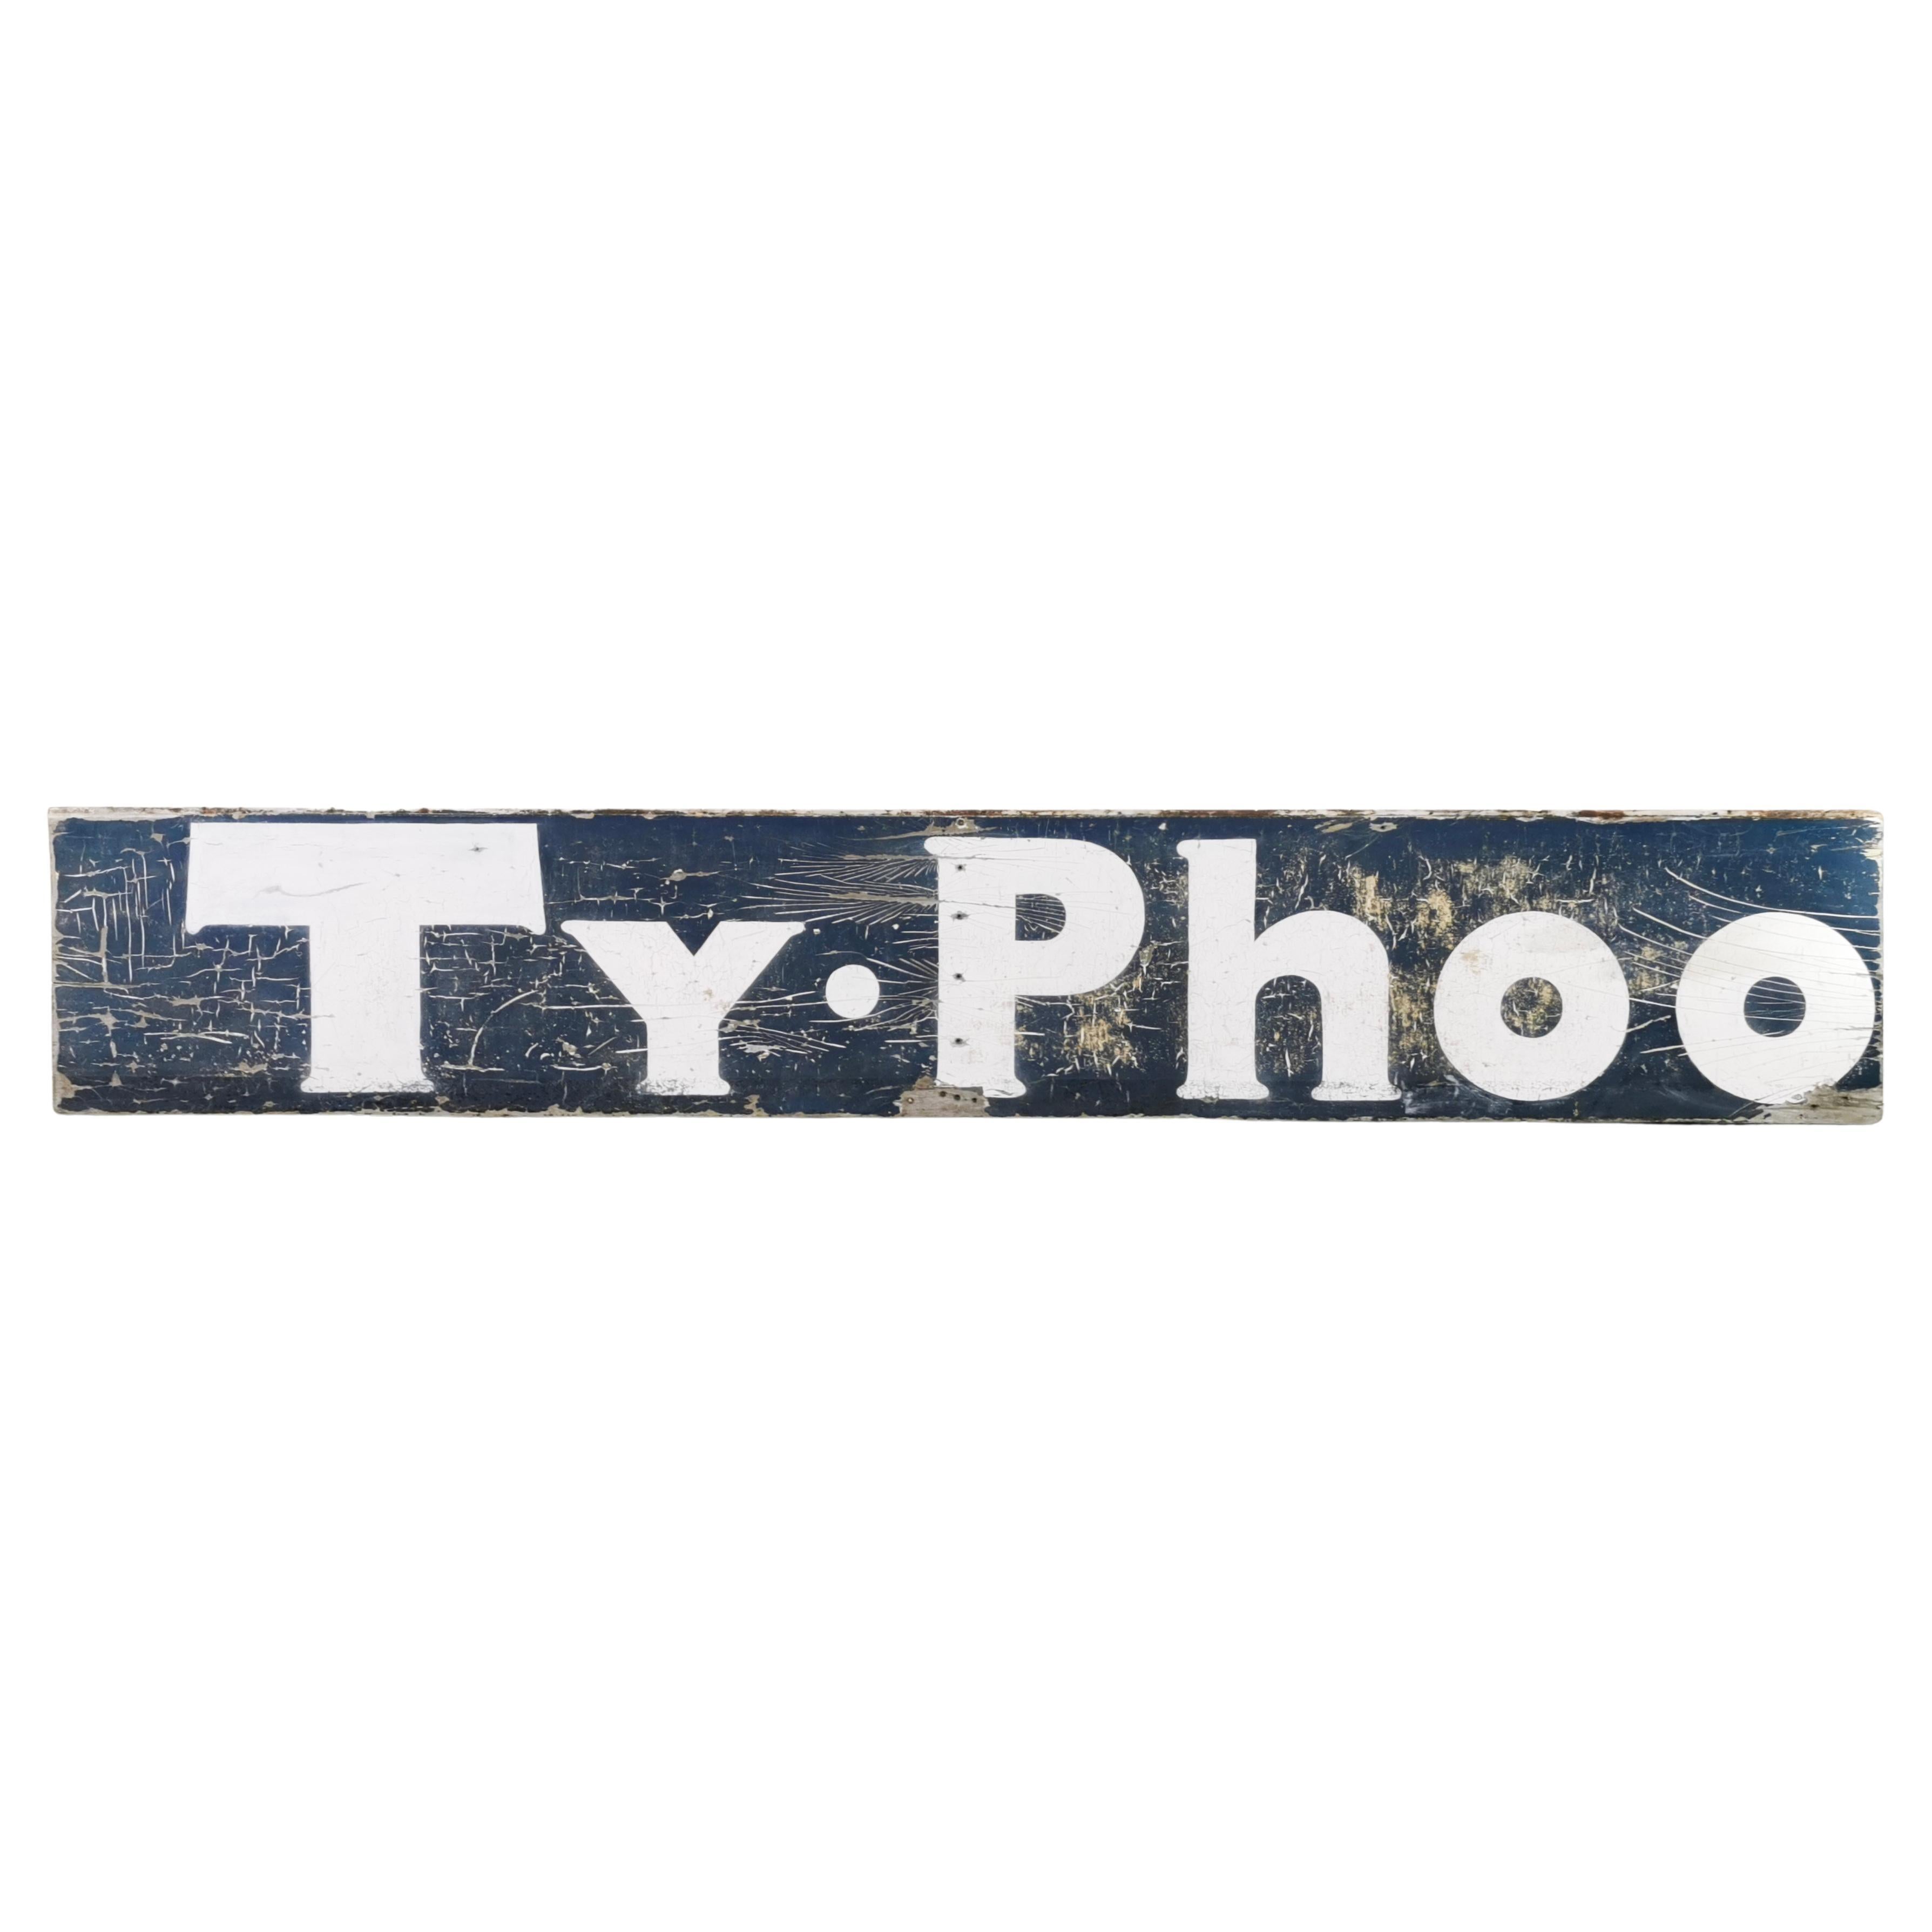 Early 20th Century 9 Foot Reclaimed Advertising Wooden Sign for Typhoo Tea